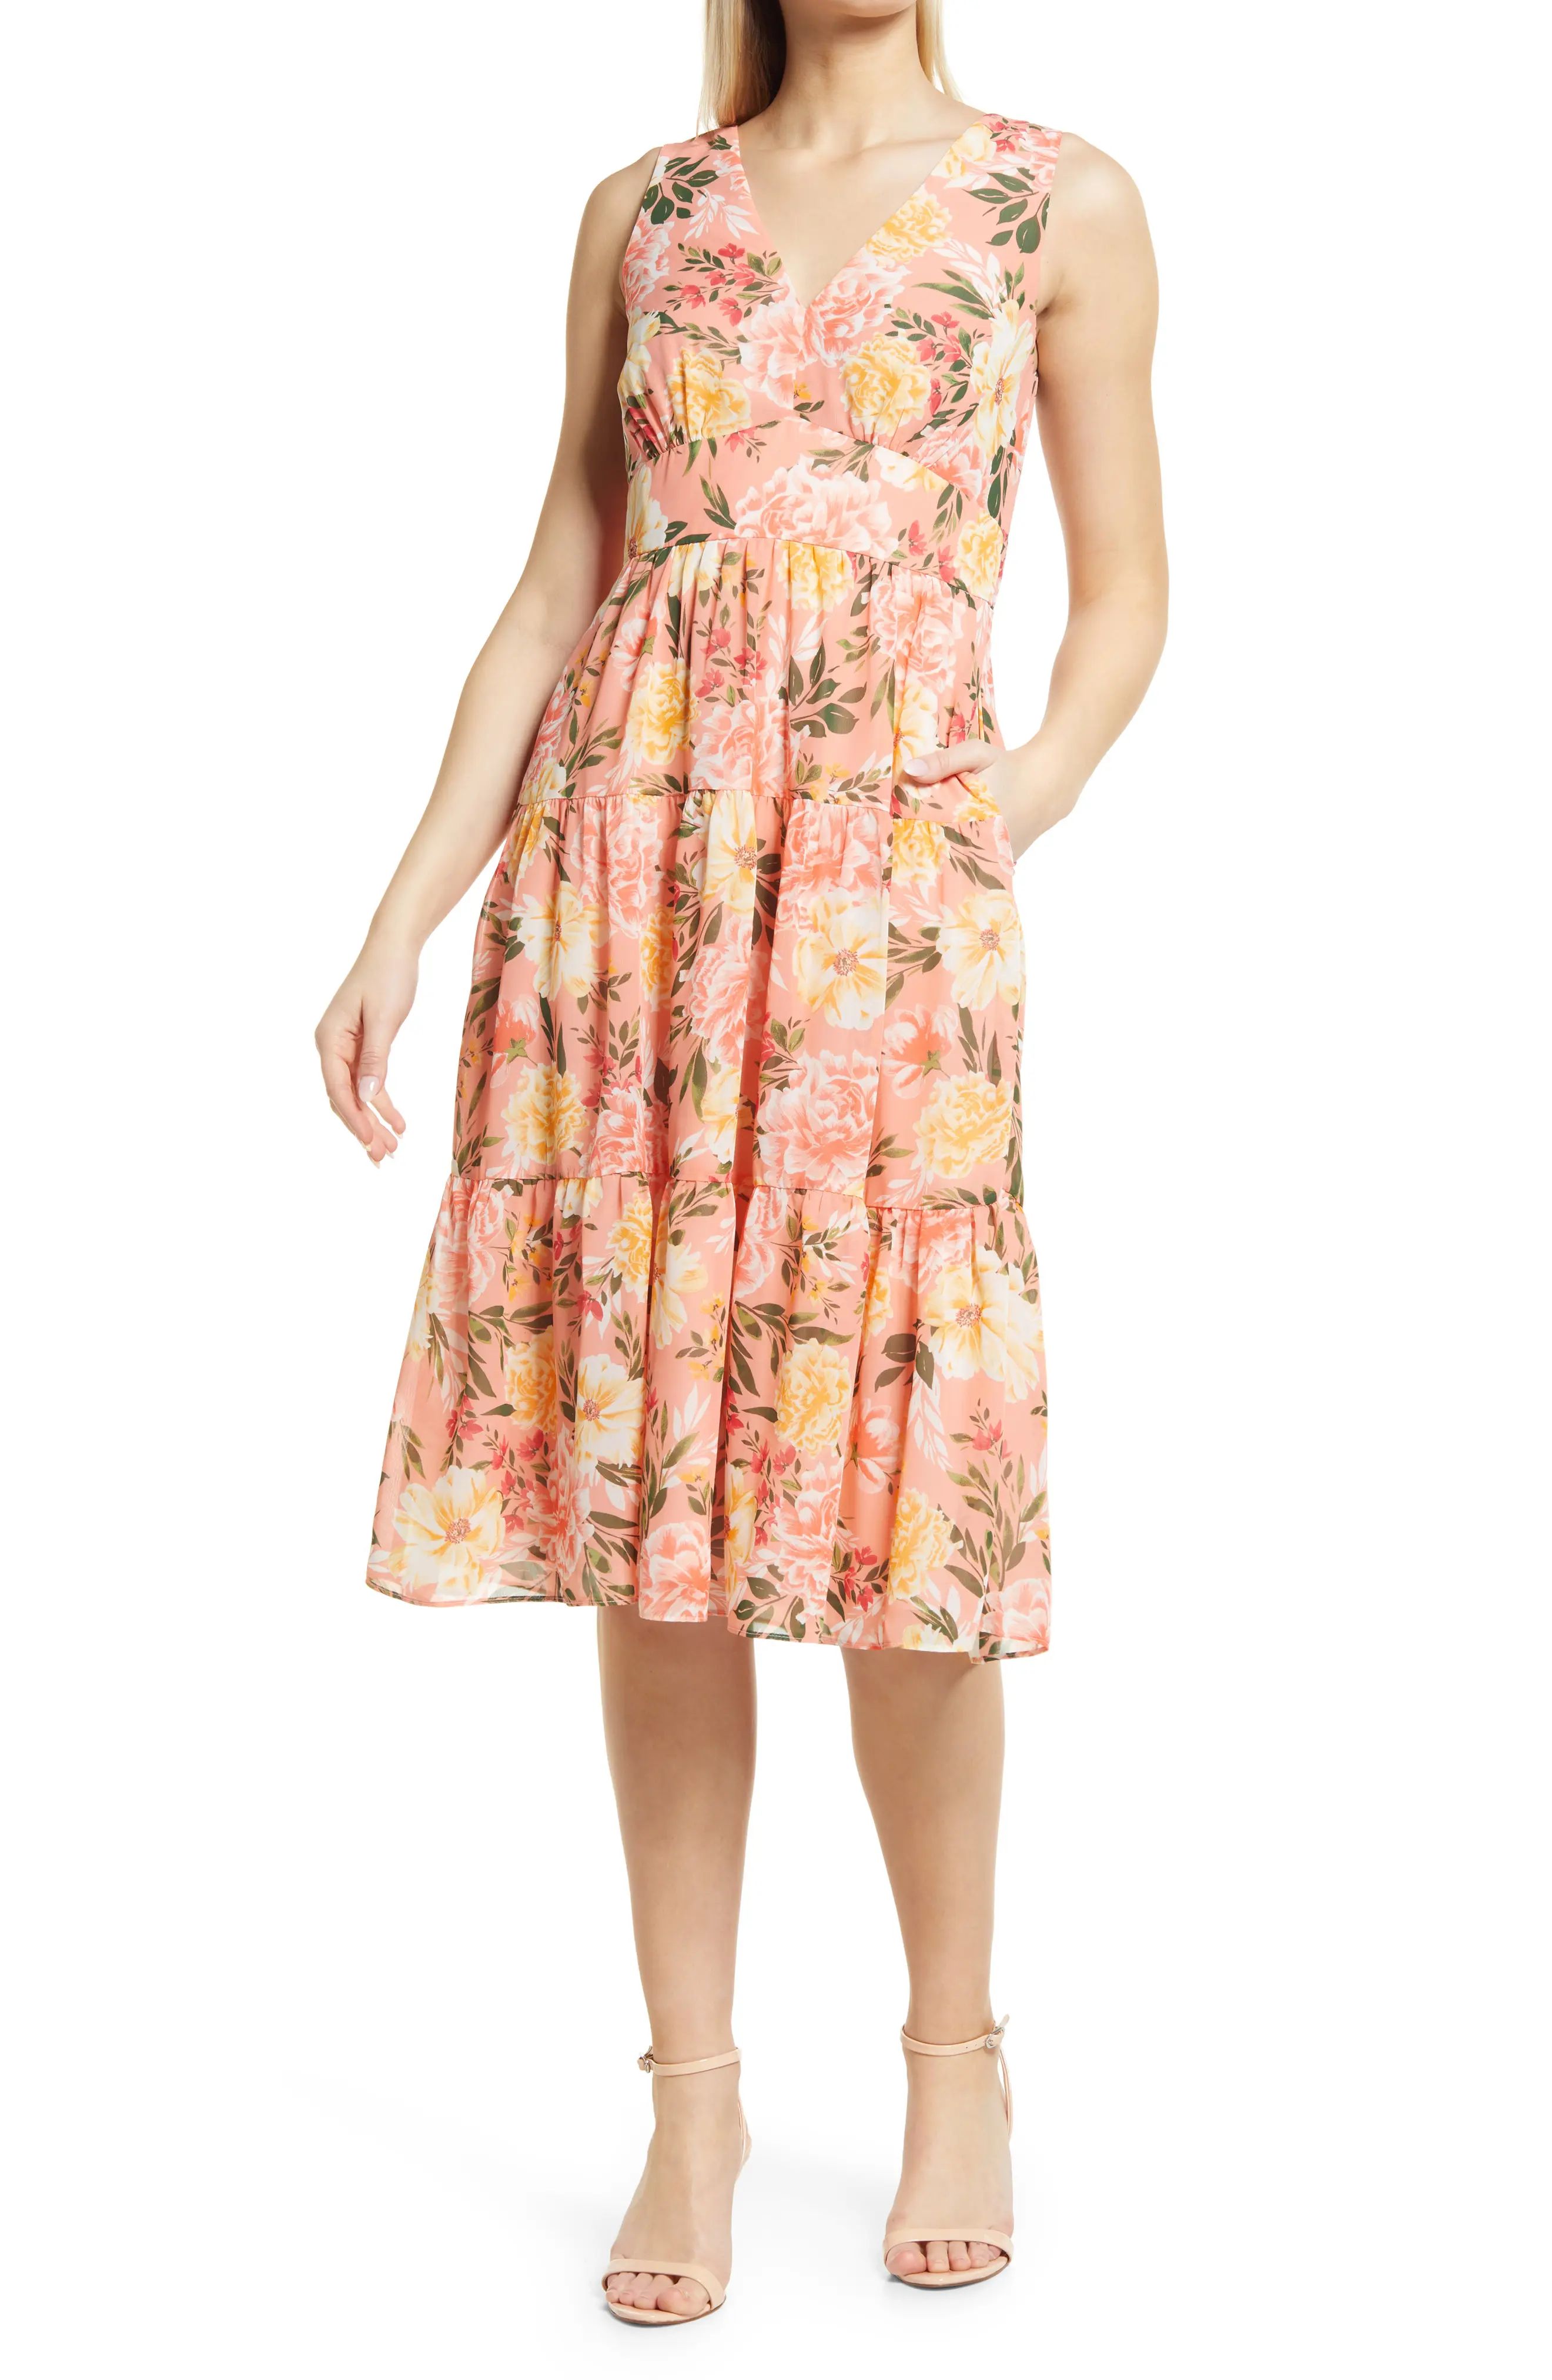 Vince Camuto Floral Sleeveless Tiered Ruffle Midi Dress in Blush at Nordstrom, Size 6 | Nordstrom